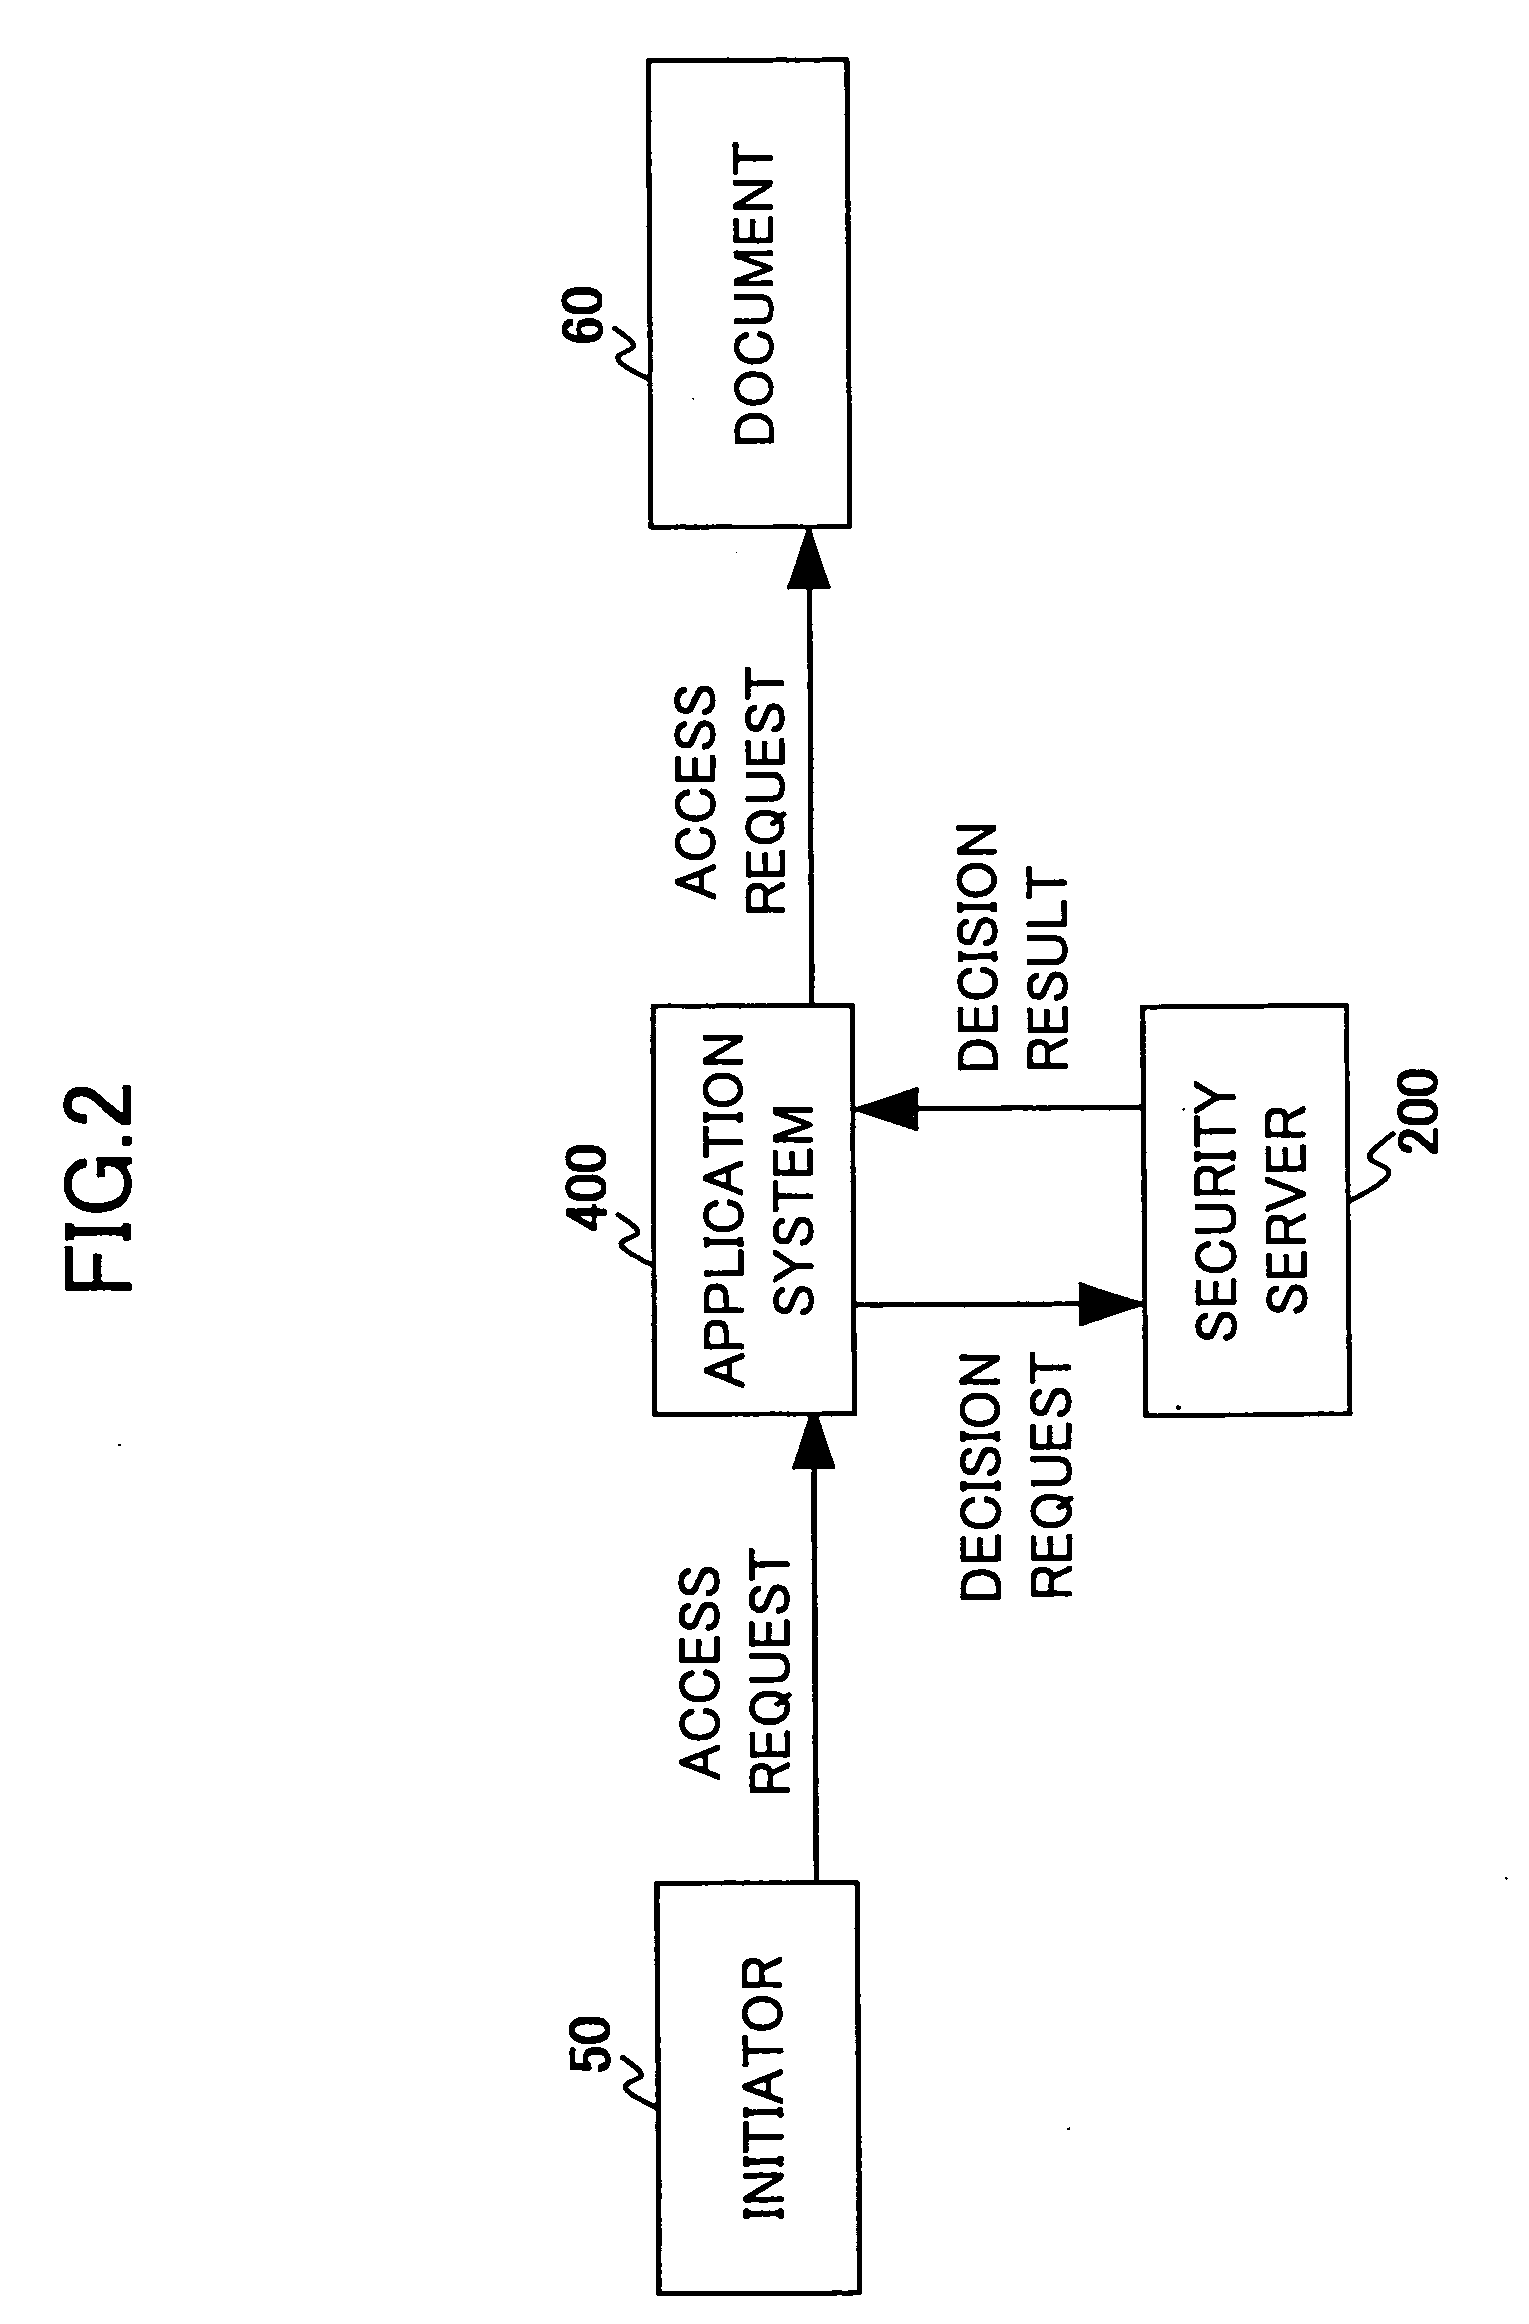 Access control decision system, access control enforcing system, and security policy